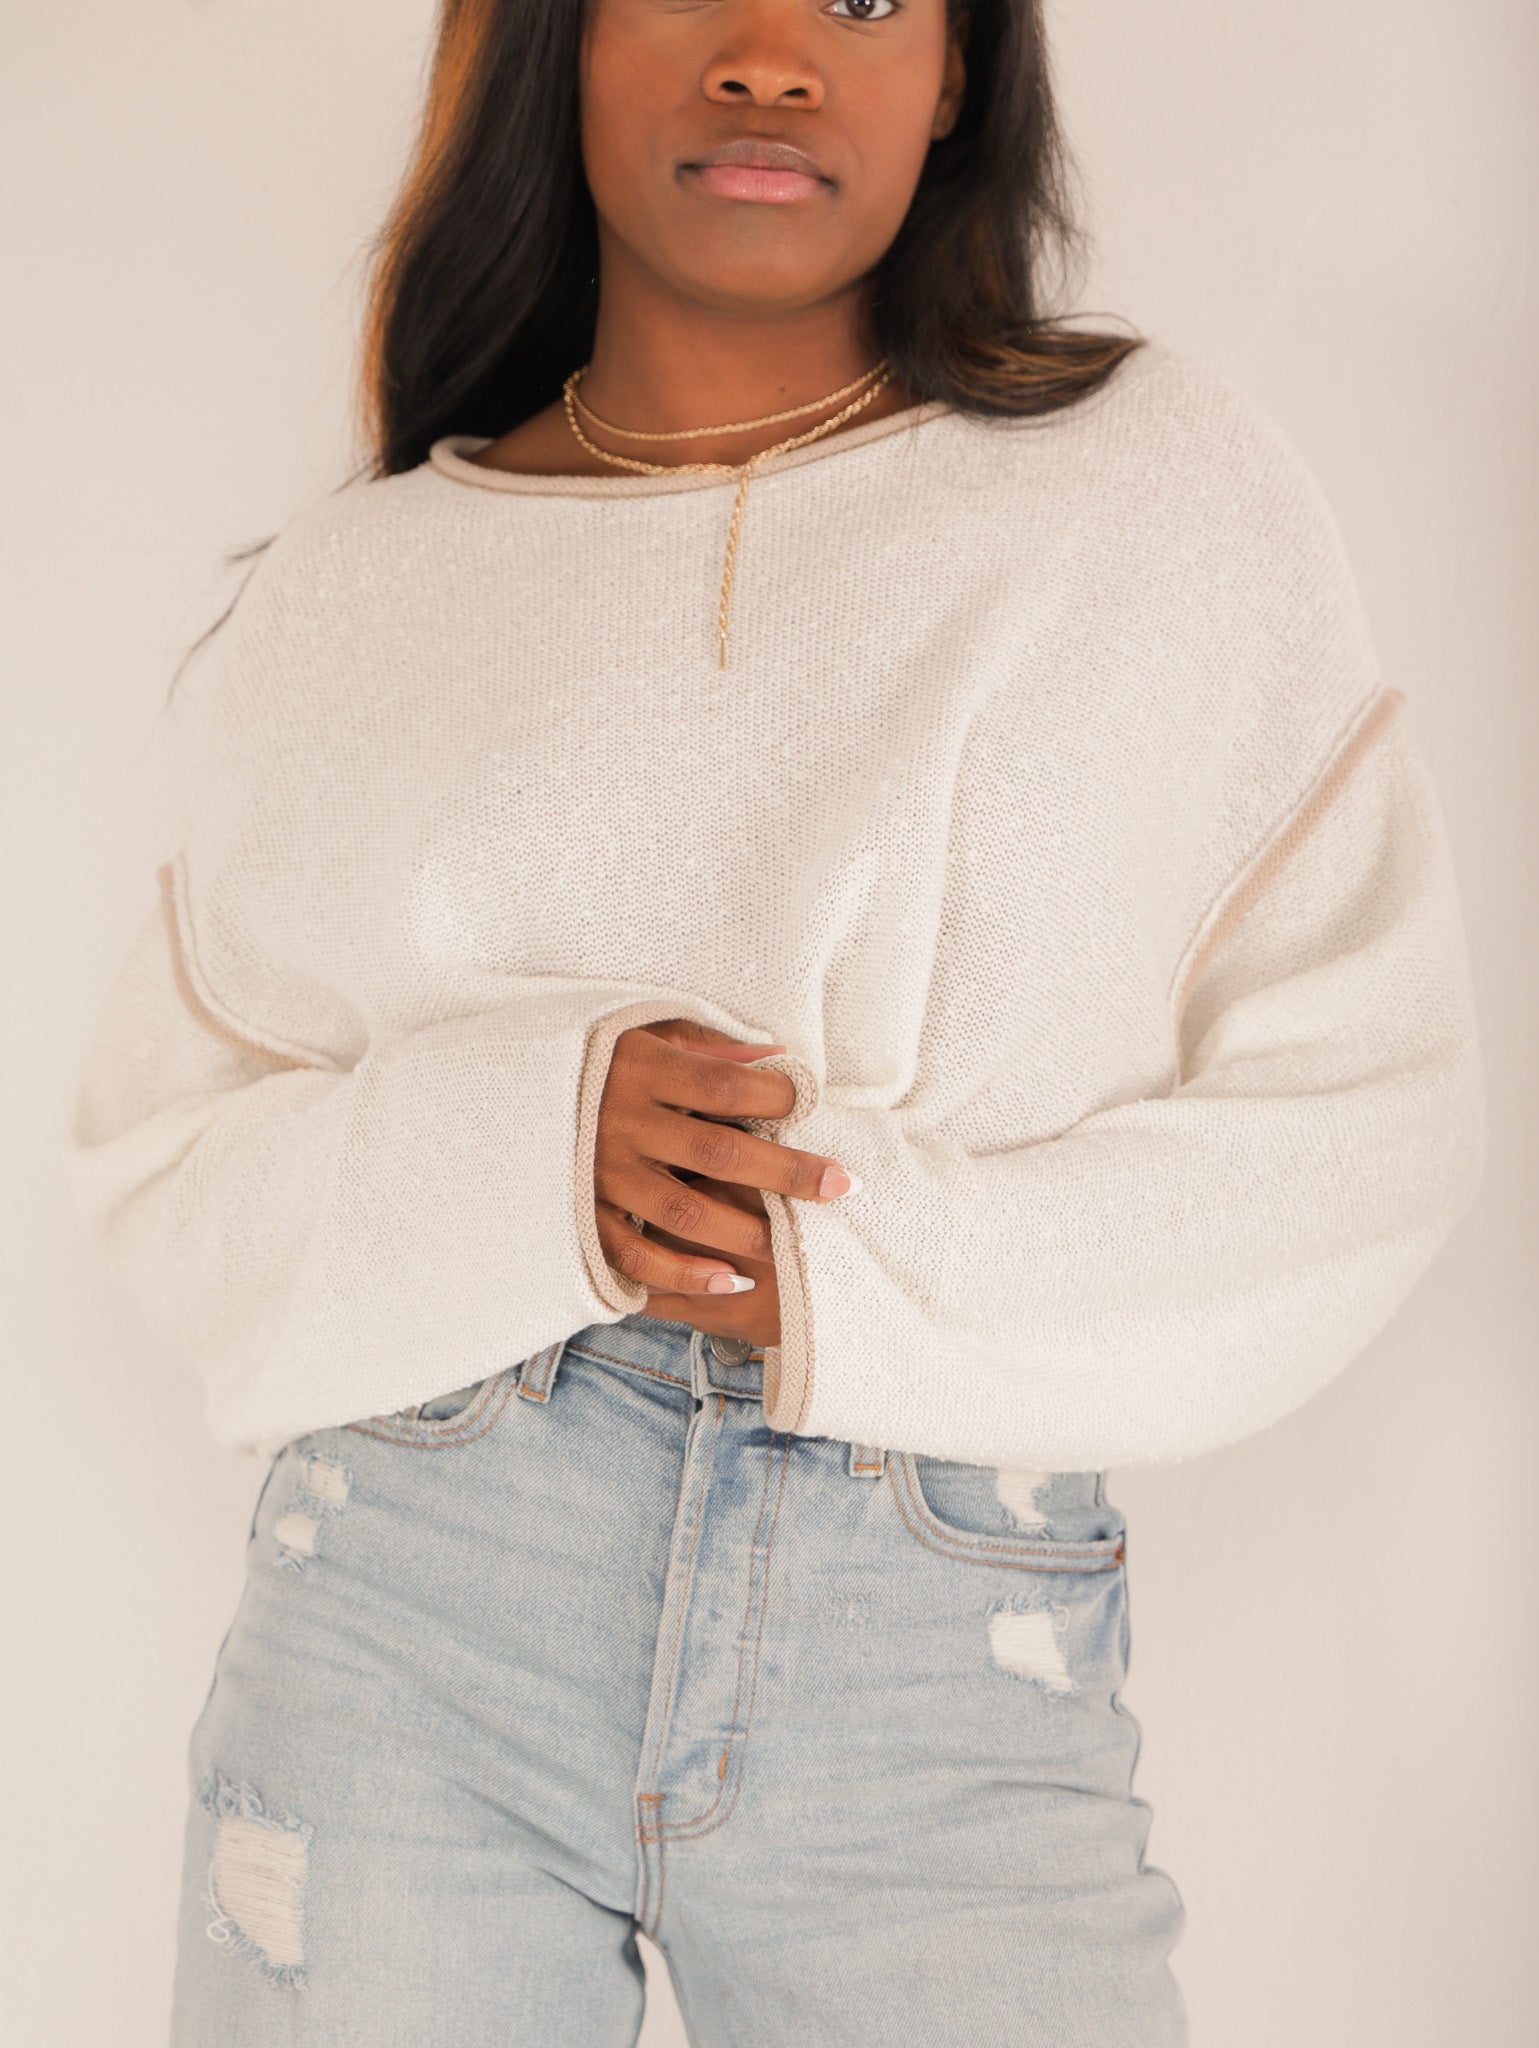 Molly Green - Sawyer Off Shoulder Sweater - Sweaters_Cardigans